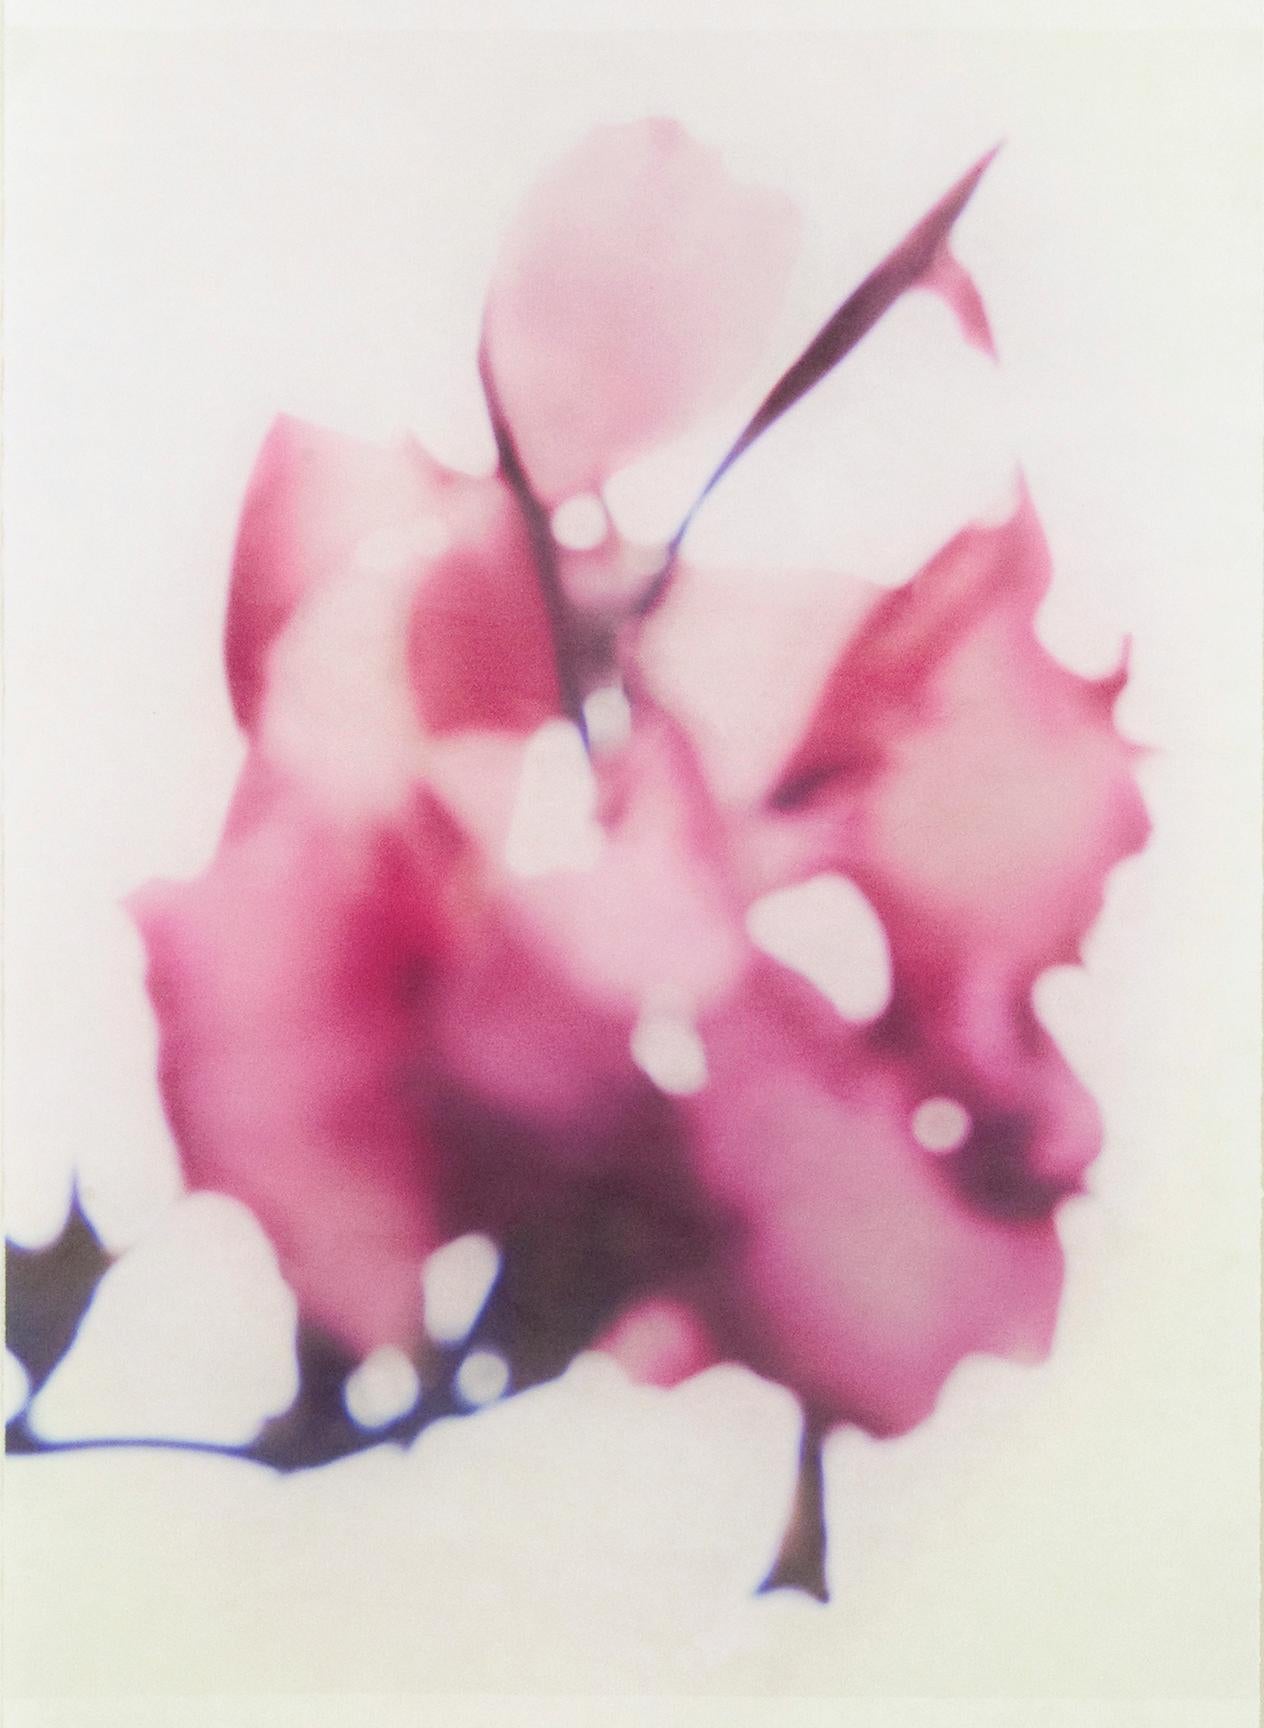 Jeri Eisenberg Still-Life Photograph - Canna No. 5 (Abstract Still Life Photograph of Magenta Lily Flower on White)